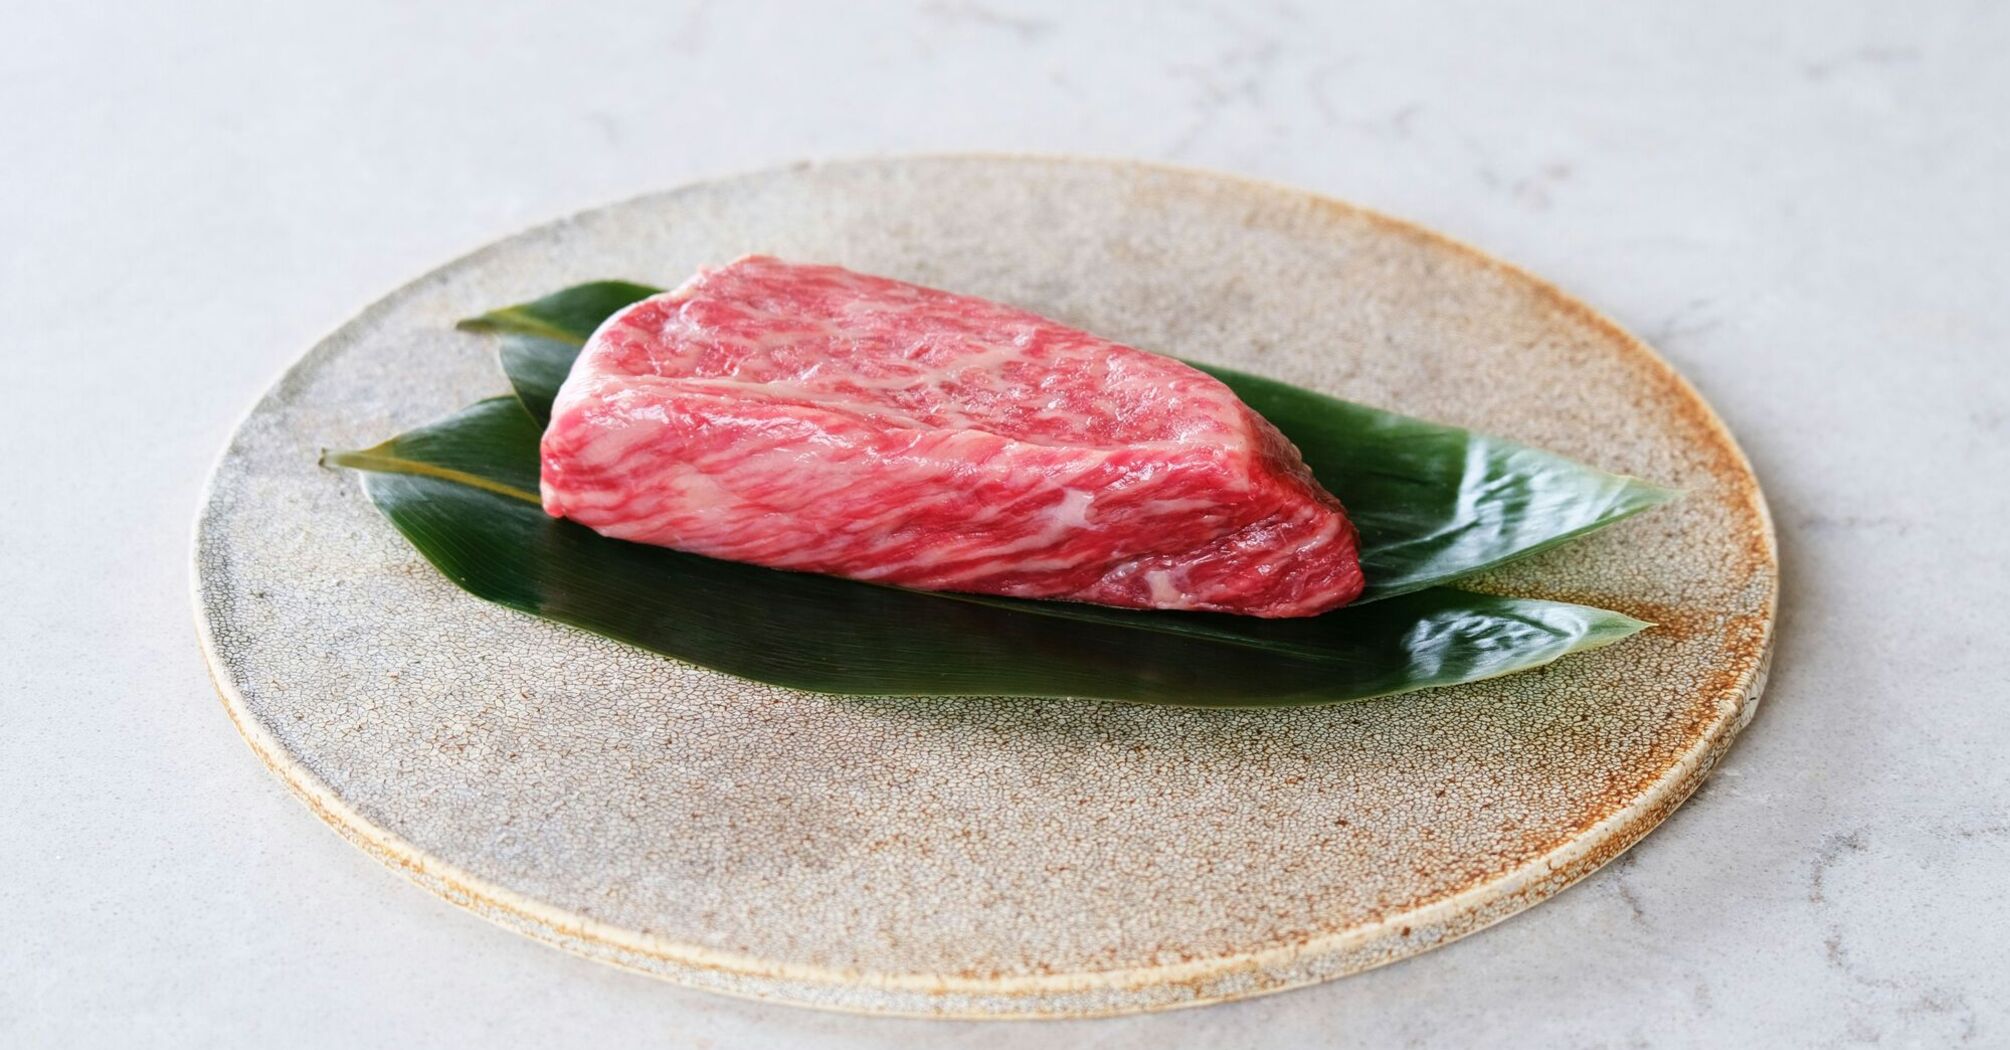 A pristine slice of Wagyu beef resting on a green leaf placed on a ceramic plate with a sandy texture, against a light grey surface